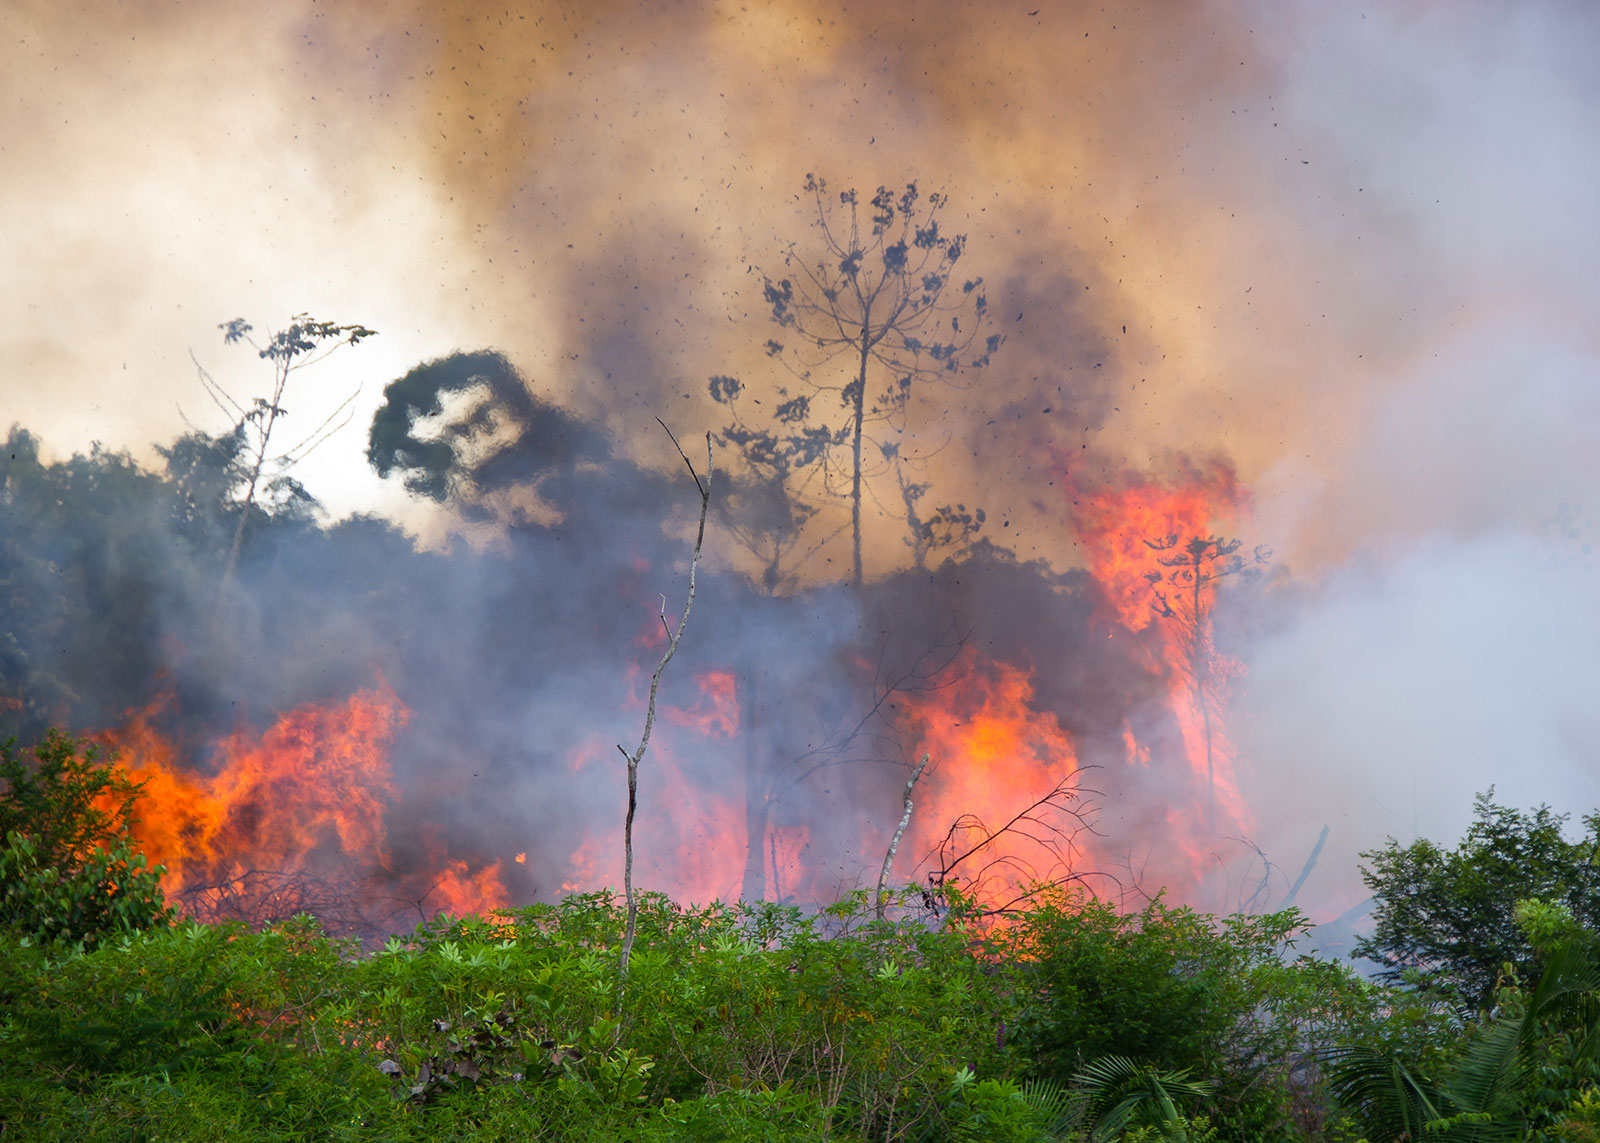 Flames engulf trees in the Brazilian Amazon, surrounded by brown smoke and flying ash